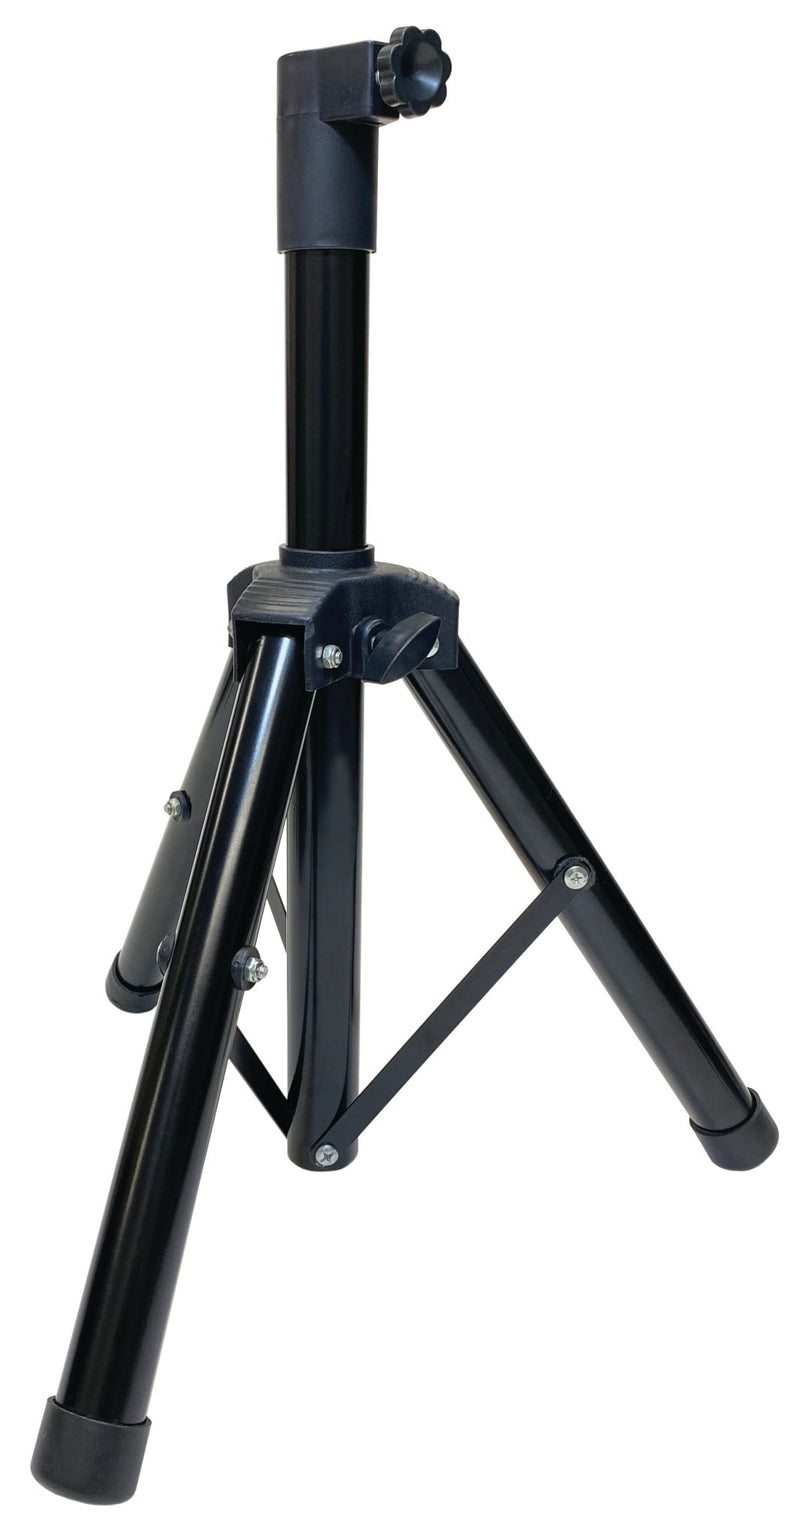 Tripod Stand to suit LED Area Light - Mick Tighe 4x4 & Outdoor-Ironman 4x4-IAREATRIPOD--Tripod Stand to suit LED Area Light